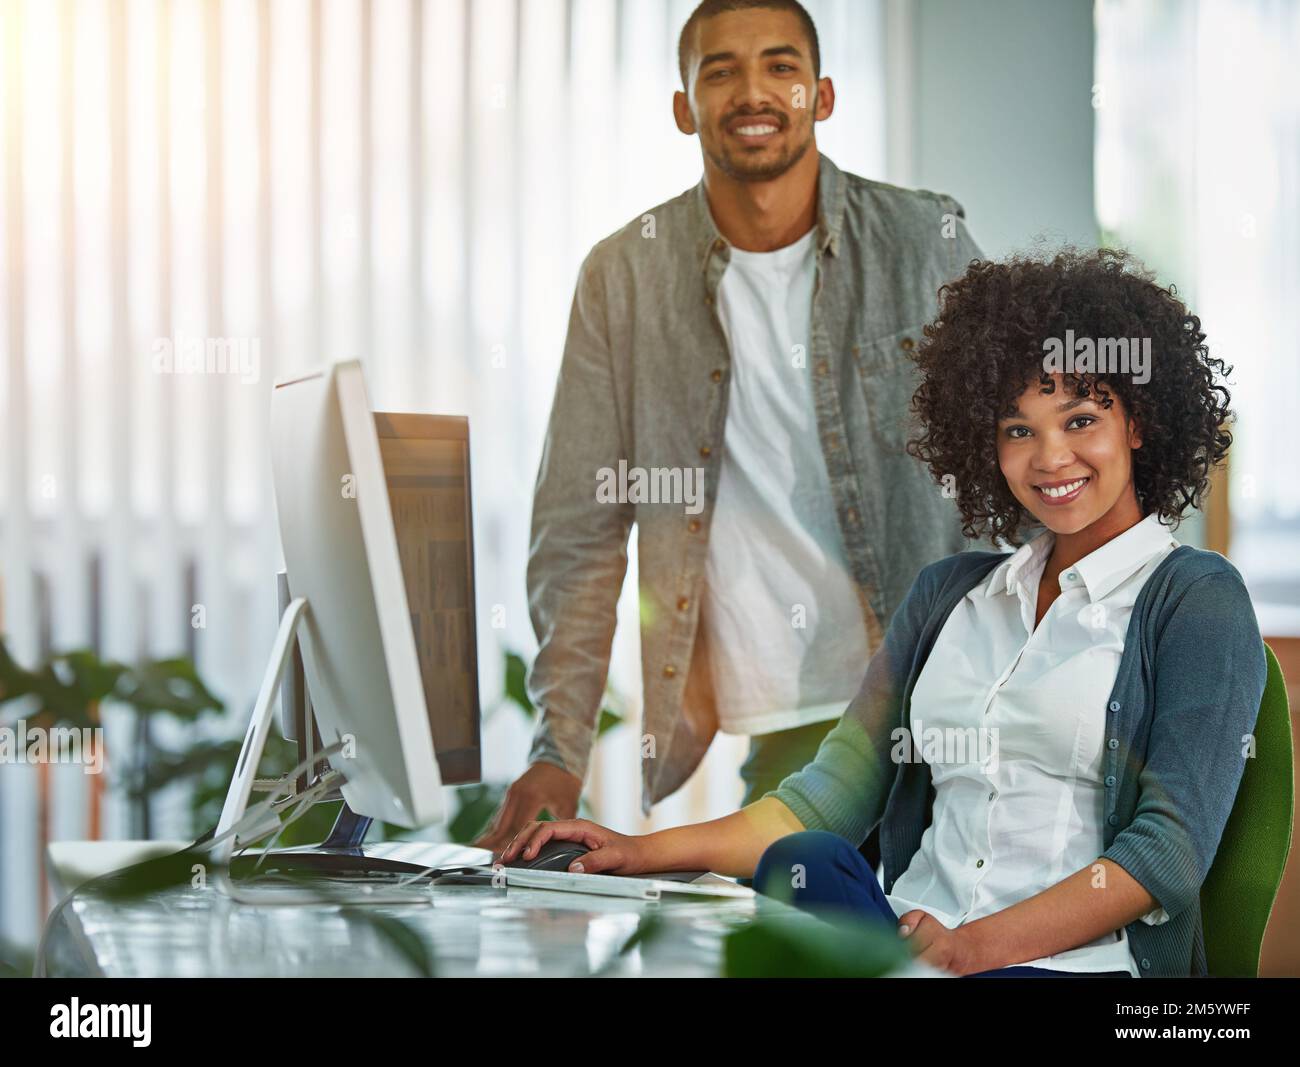 Were young innovators. Portrait of designers working together at a workstation in an office. Stock Photo